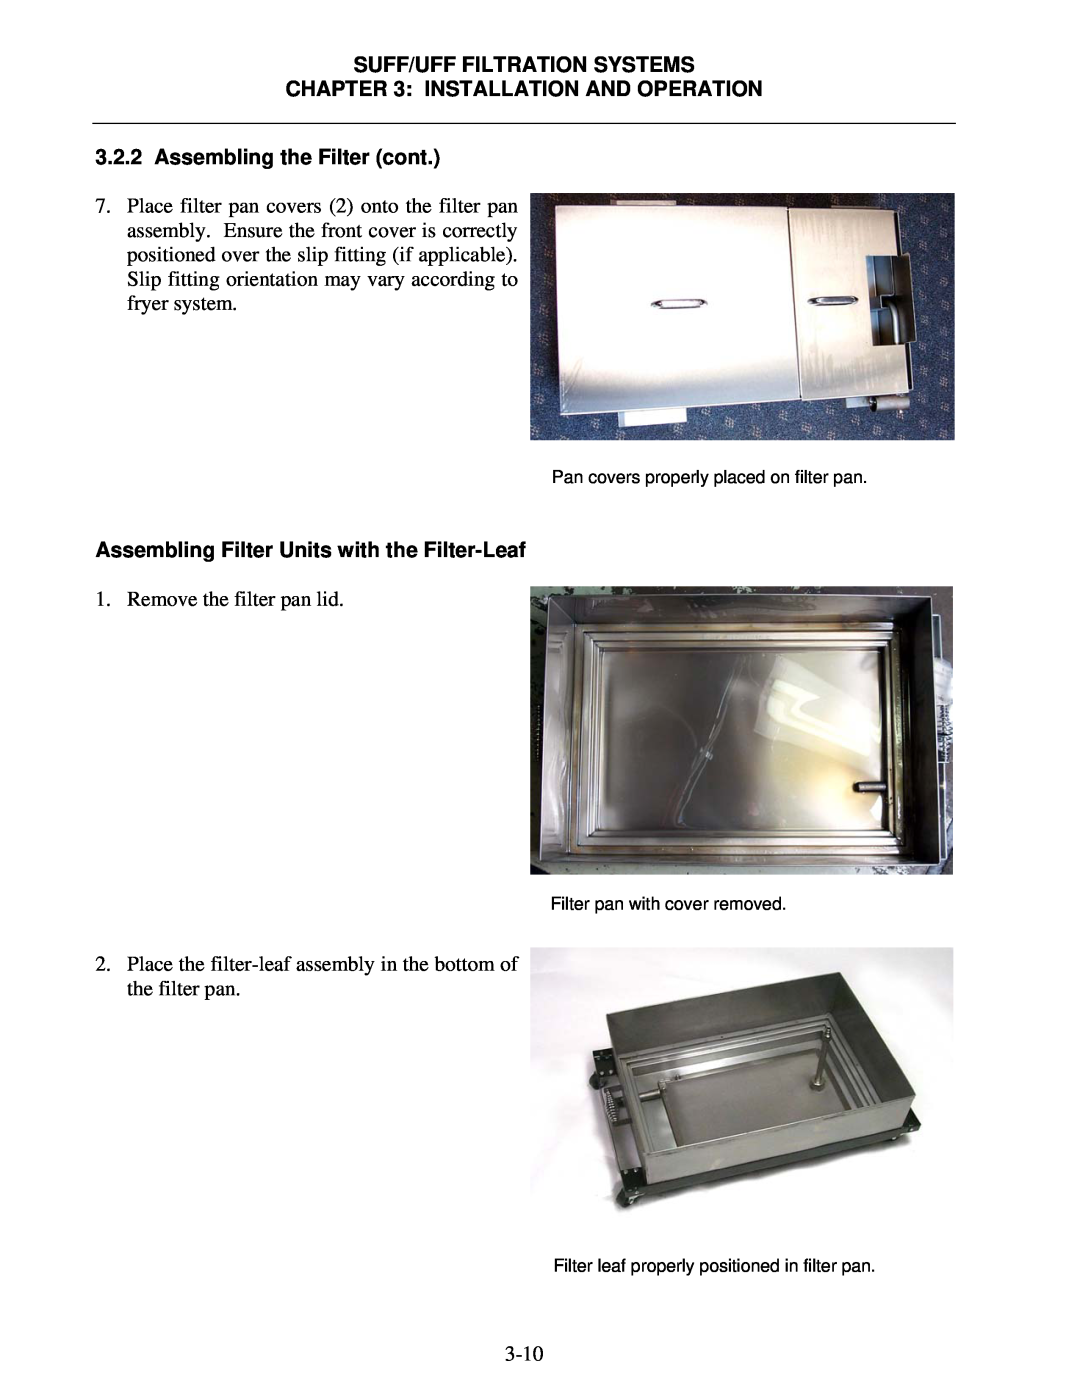 Frymaster 8195809 Assembling Filter Units with the Filter-Leaf, Suff/Uff Filtration Systems Installation And Operation 